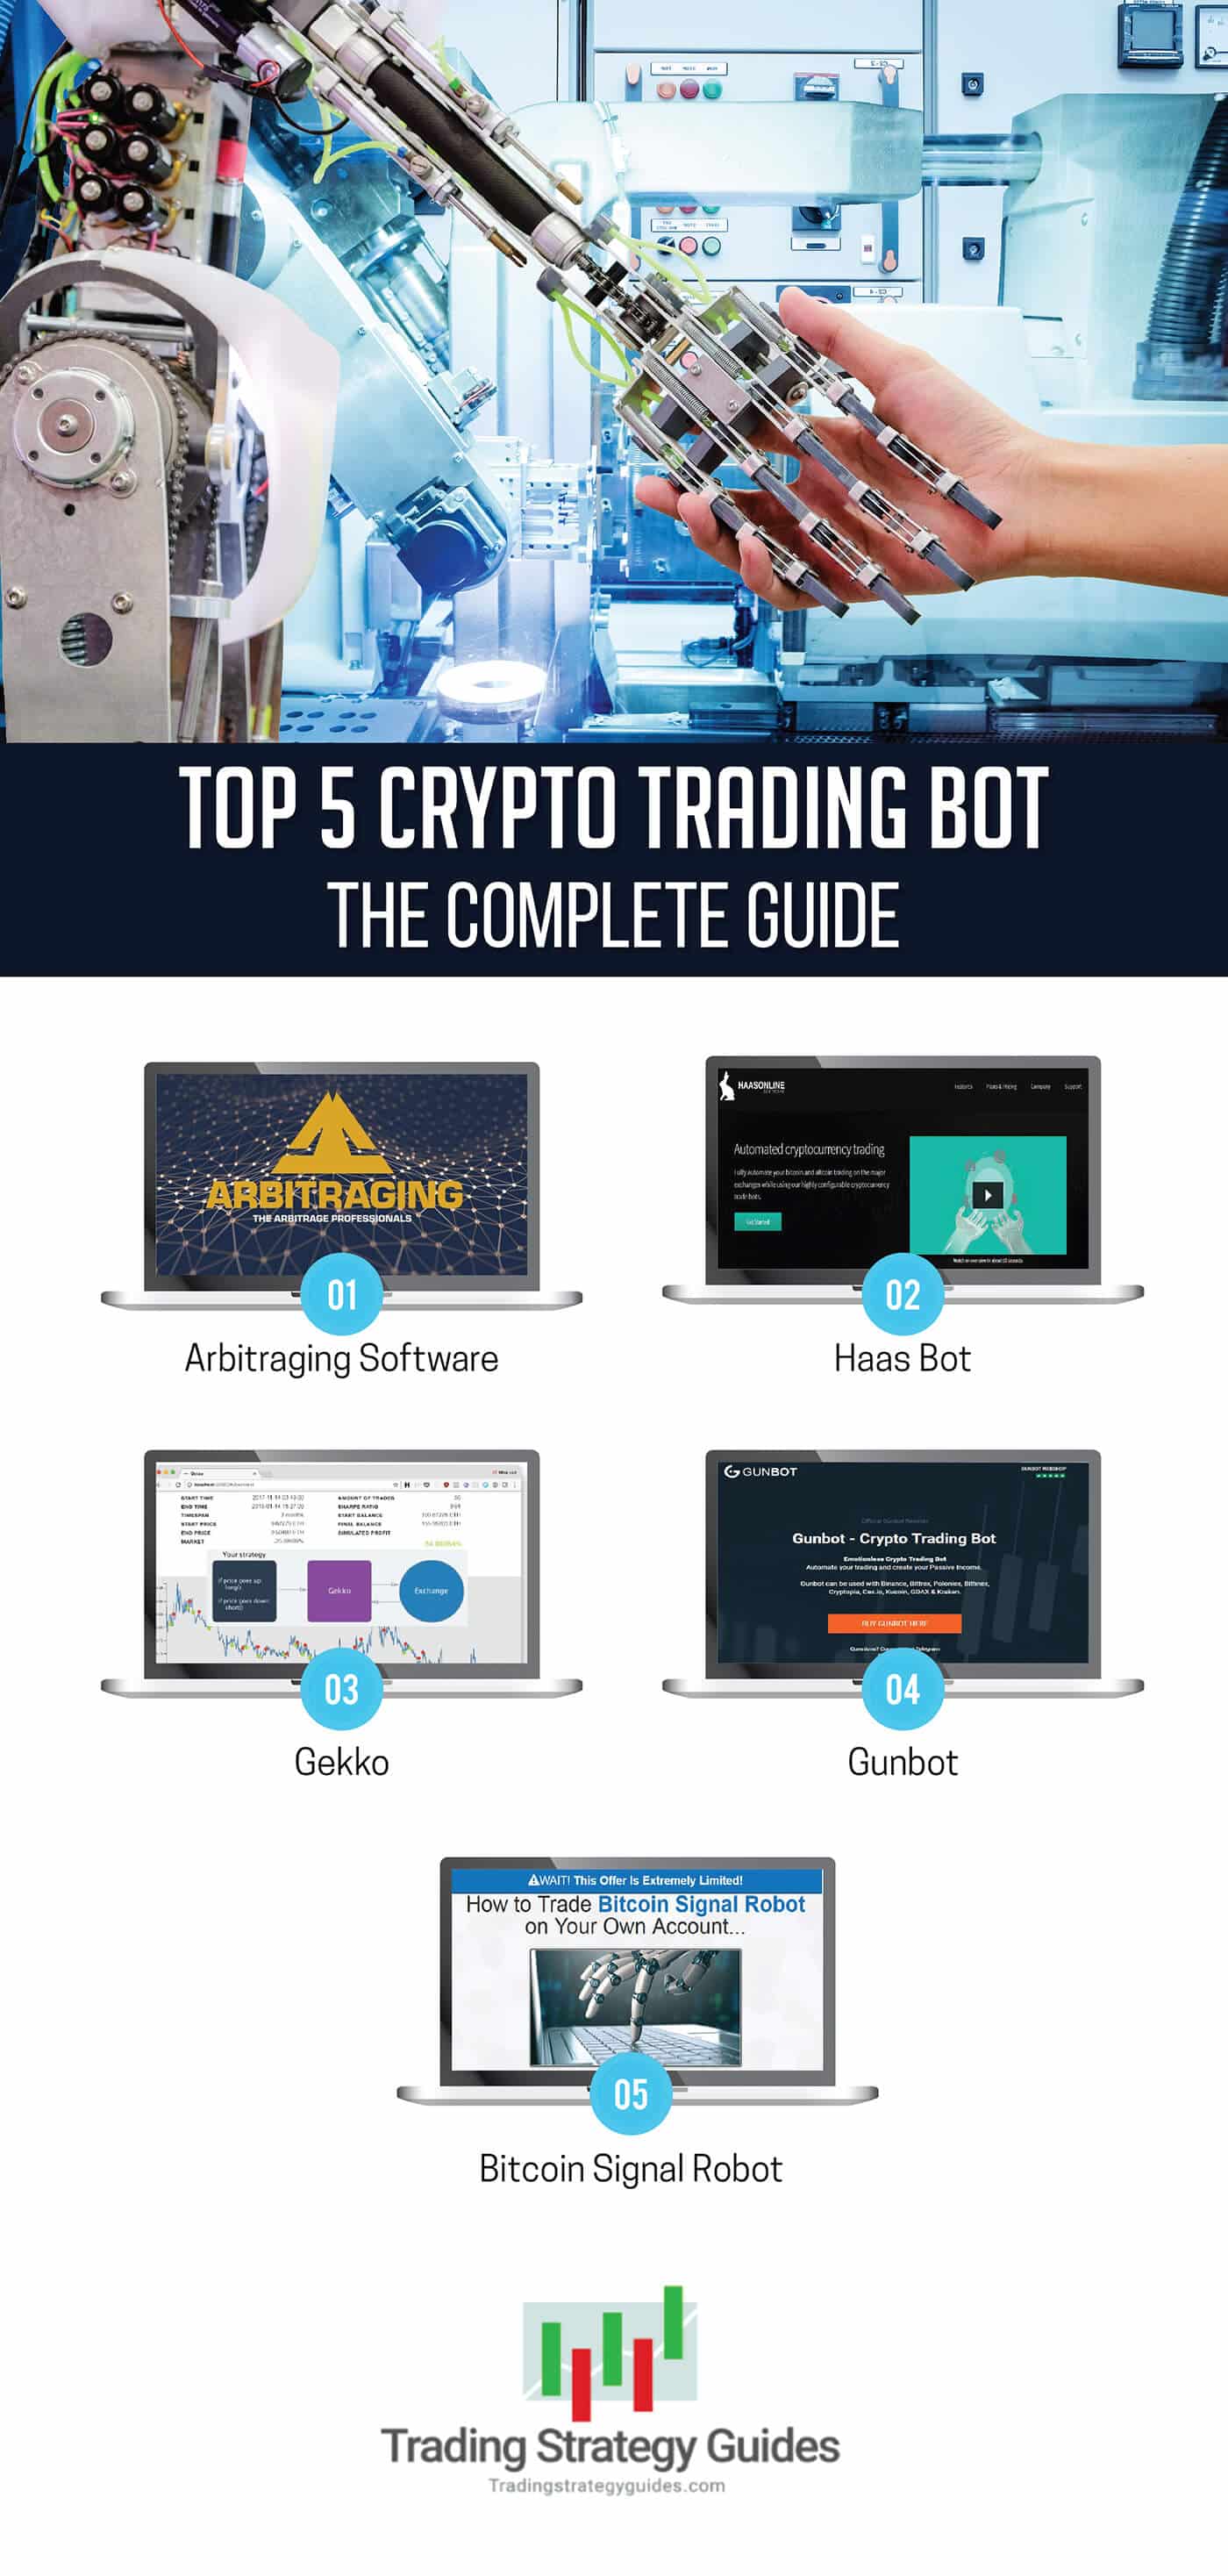 Best Crypto Trading Bots 2020 - Automate Your Trades